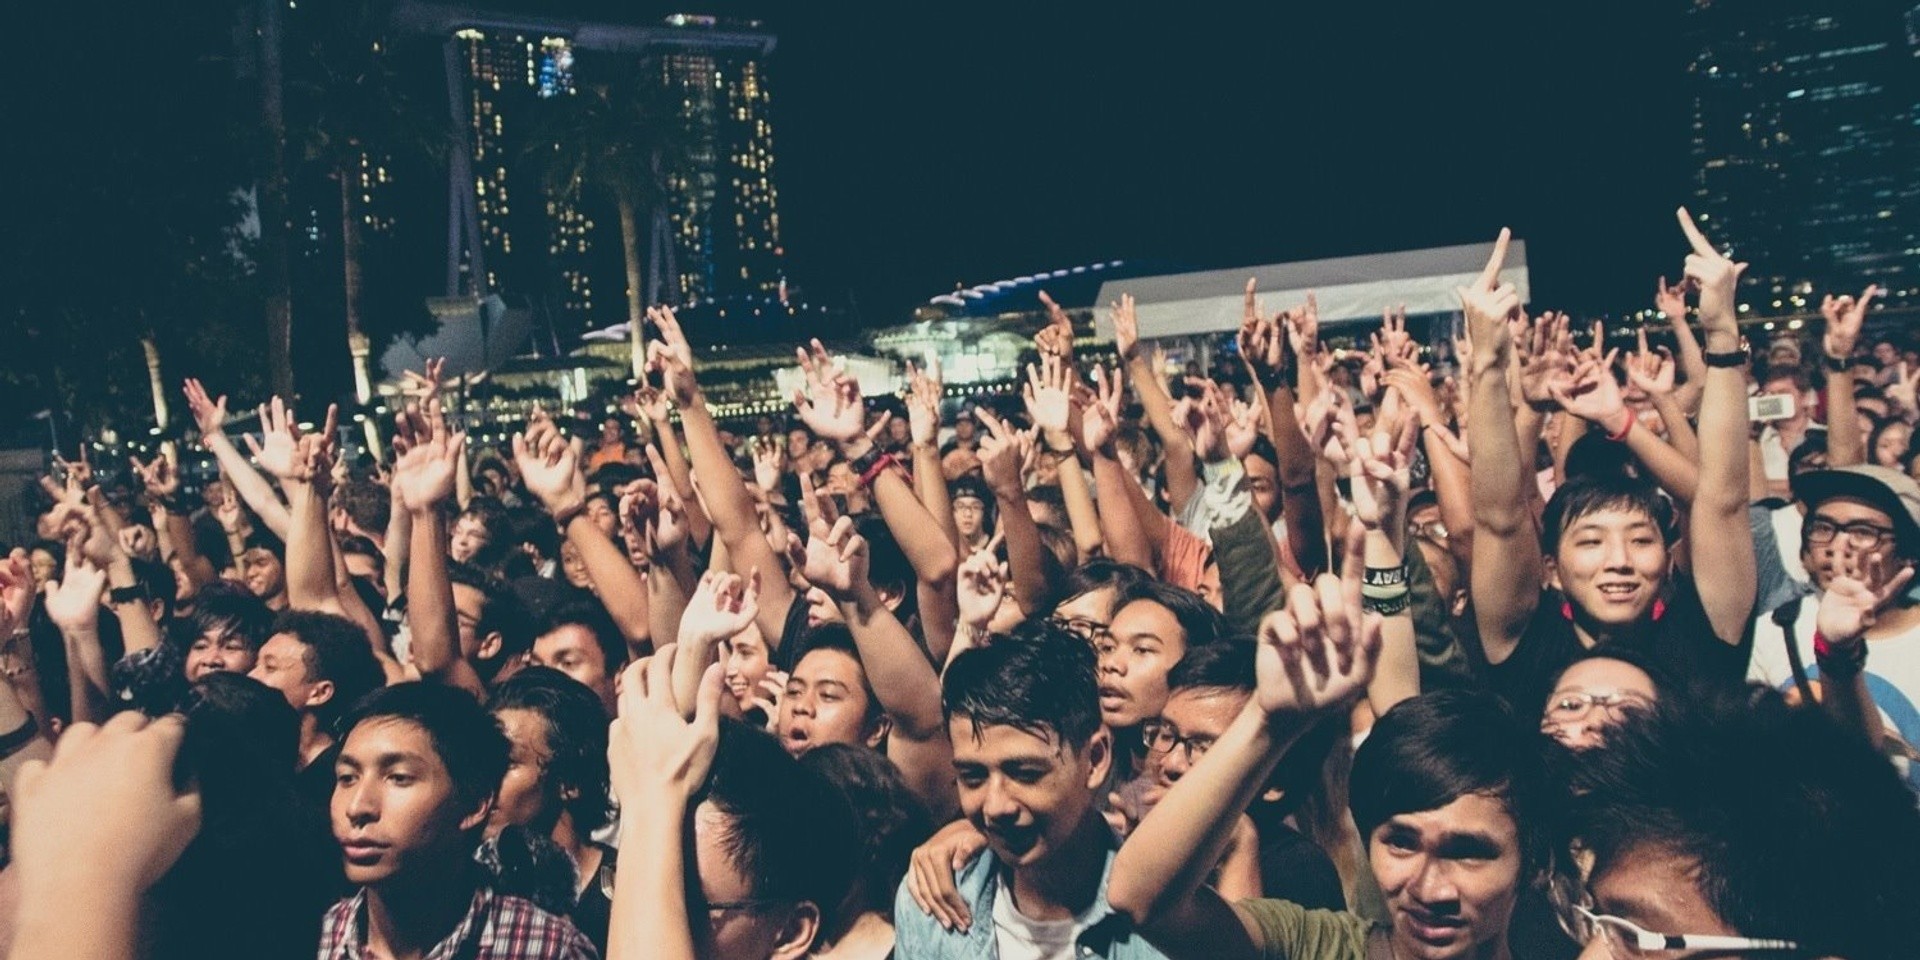 Singapore indie music scene reaches end of golden age